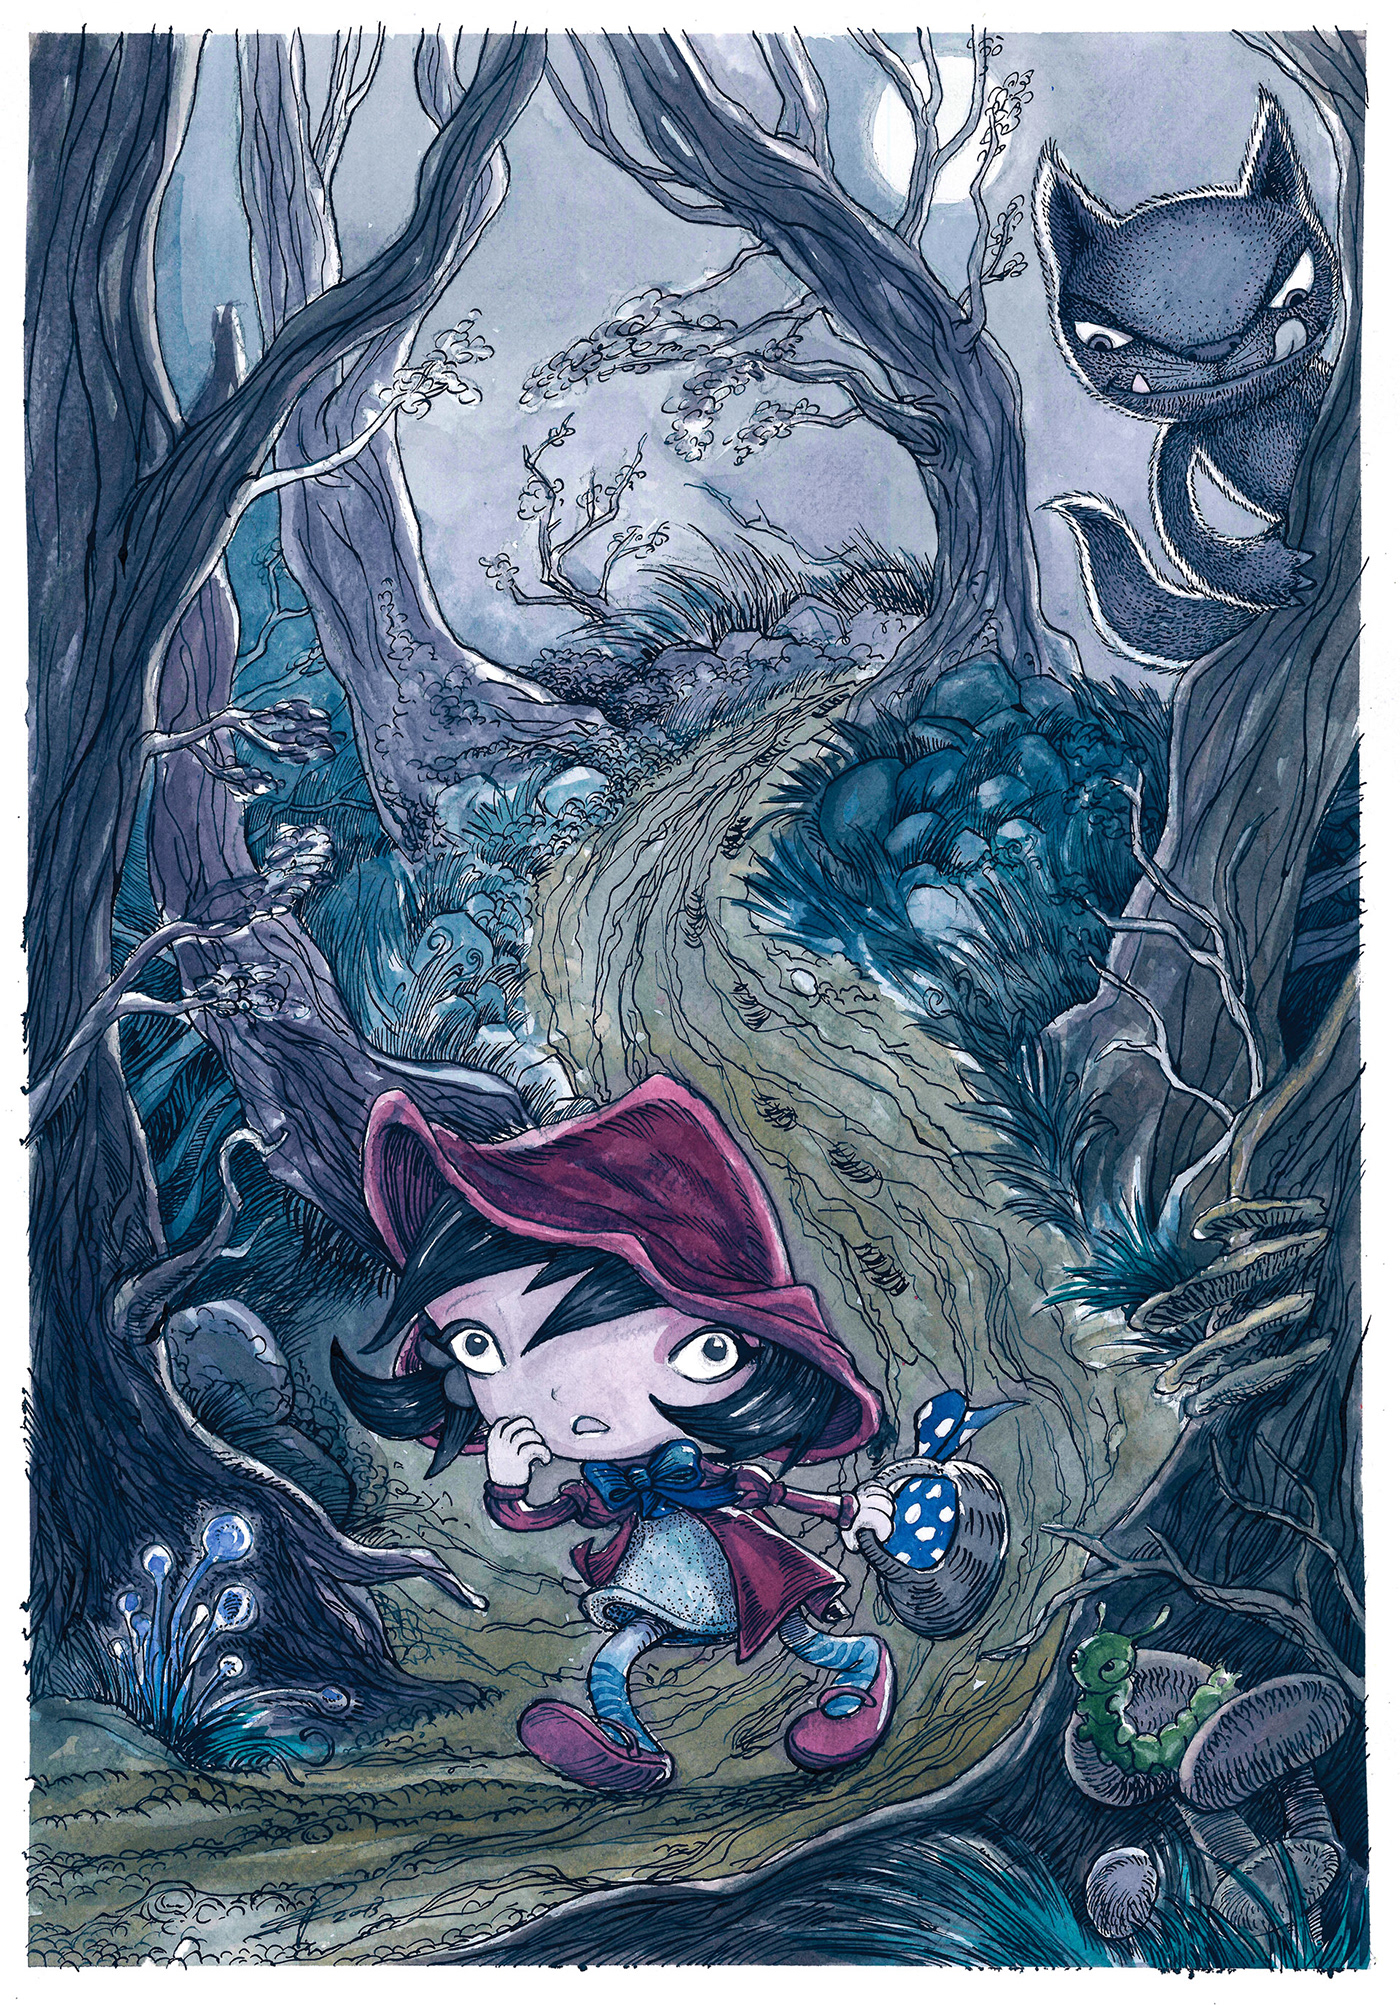 Red riding hood watercolor ink wolf Big Bad Wolf forest Grimm Fairytale brothers grimm